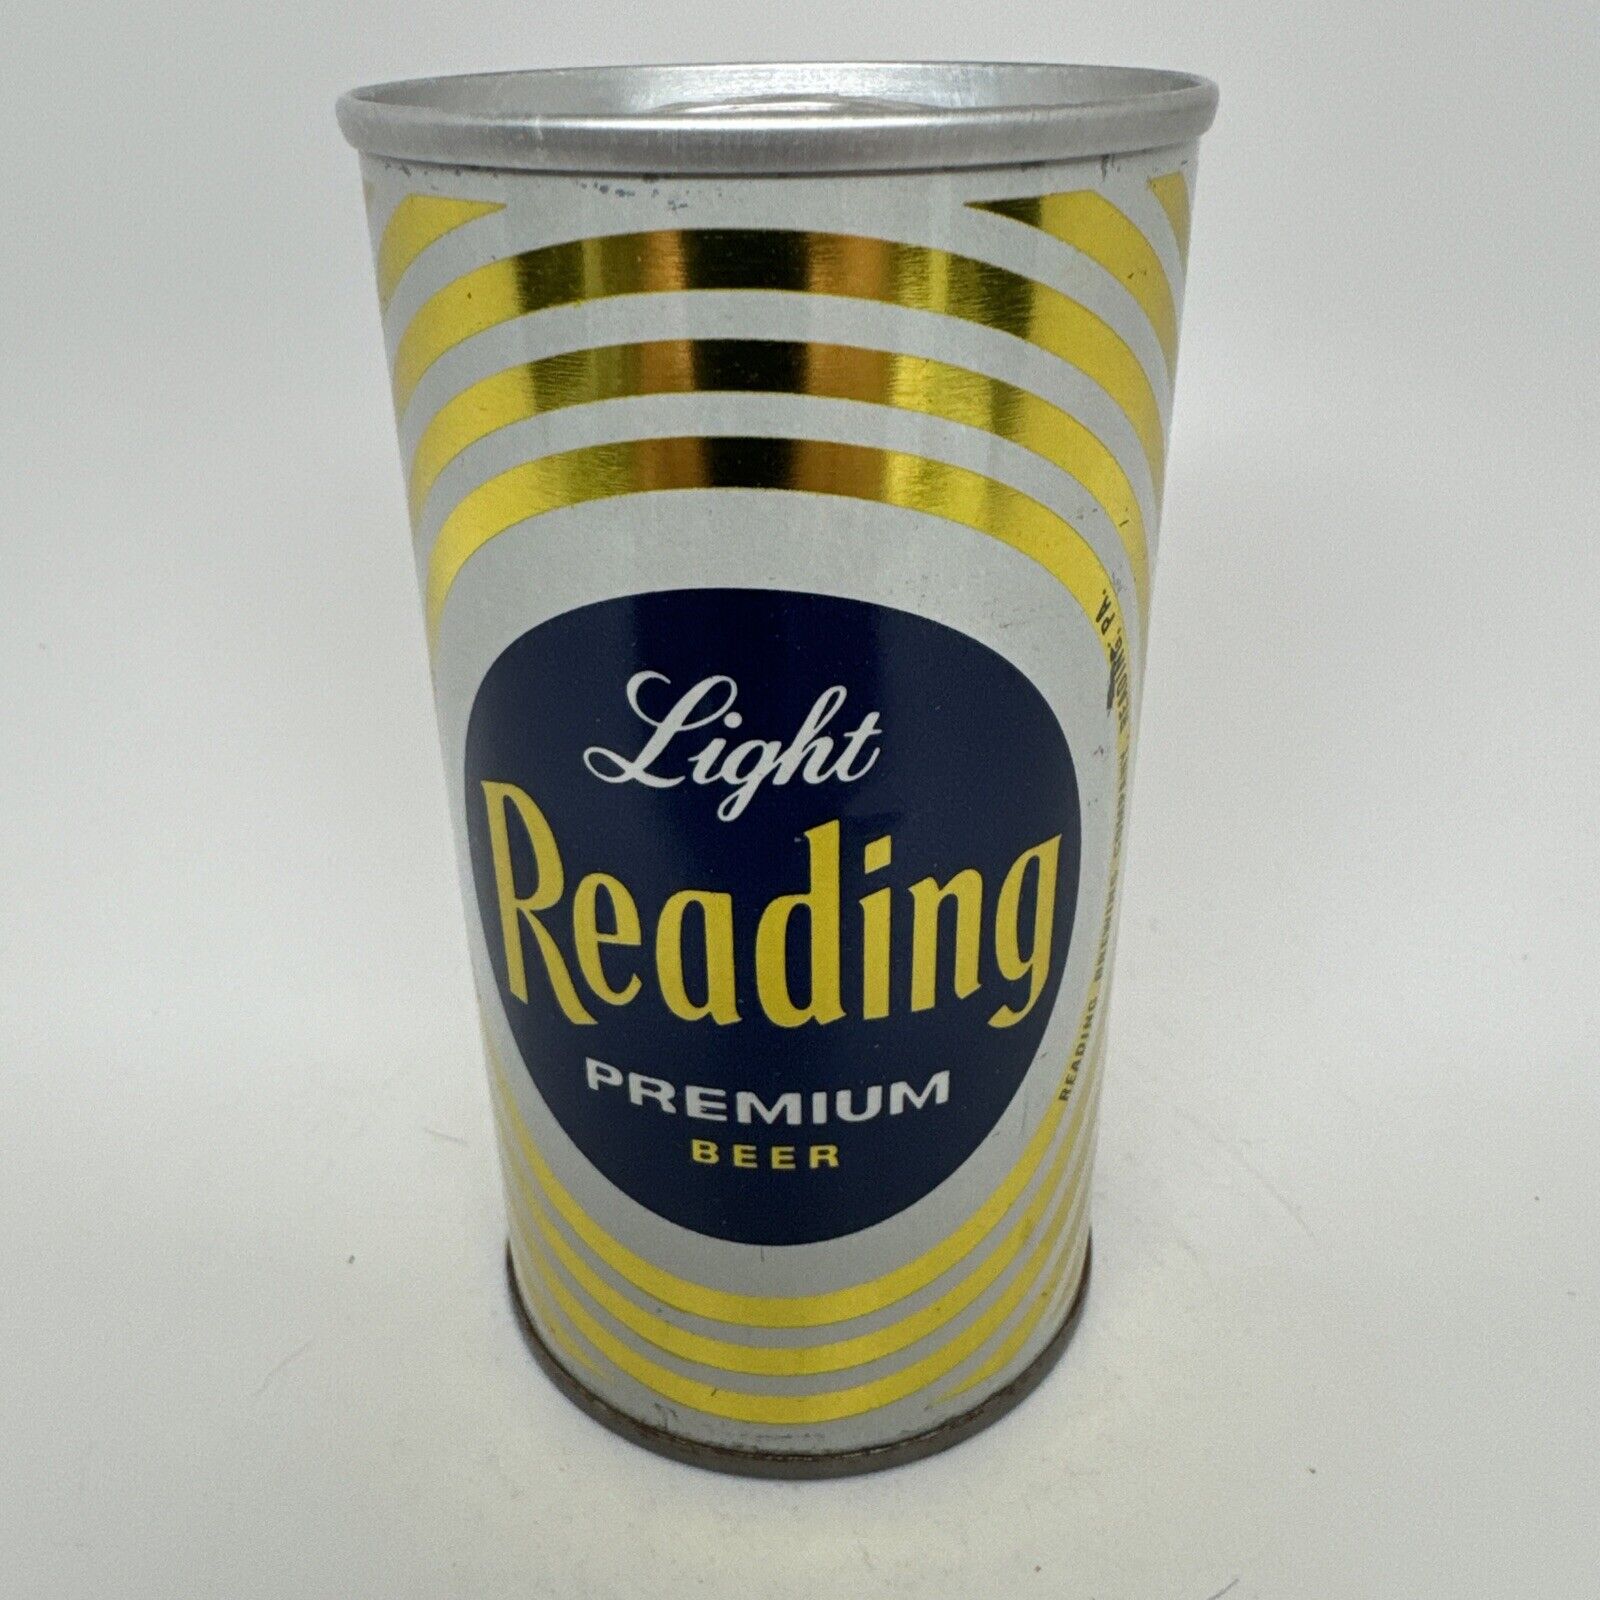 Reading Premium Beer - 1970’s Steel Can. Reading, Pennsylvania - PA